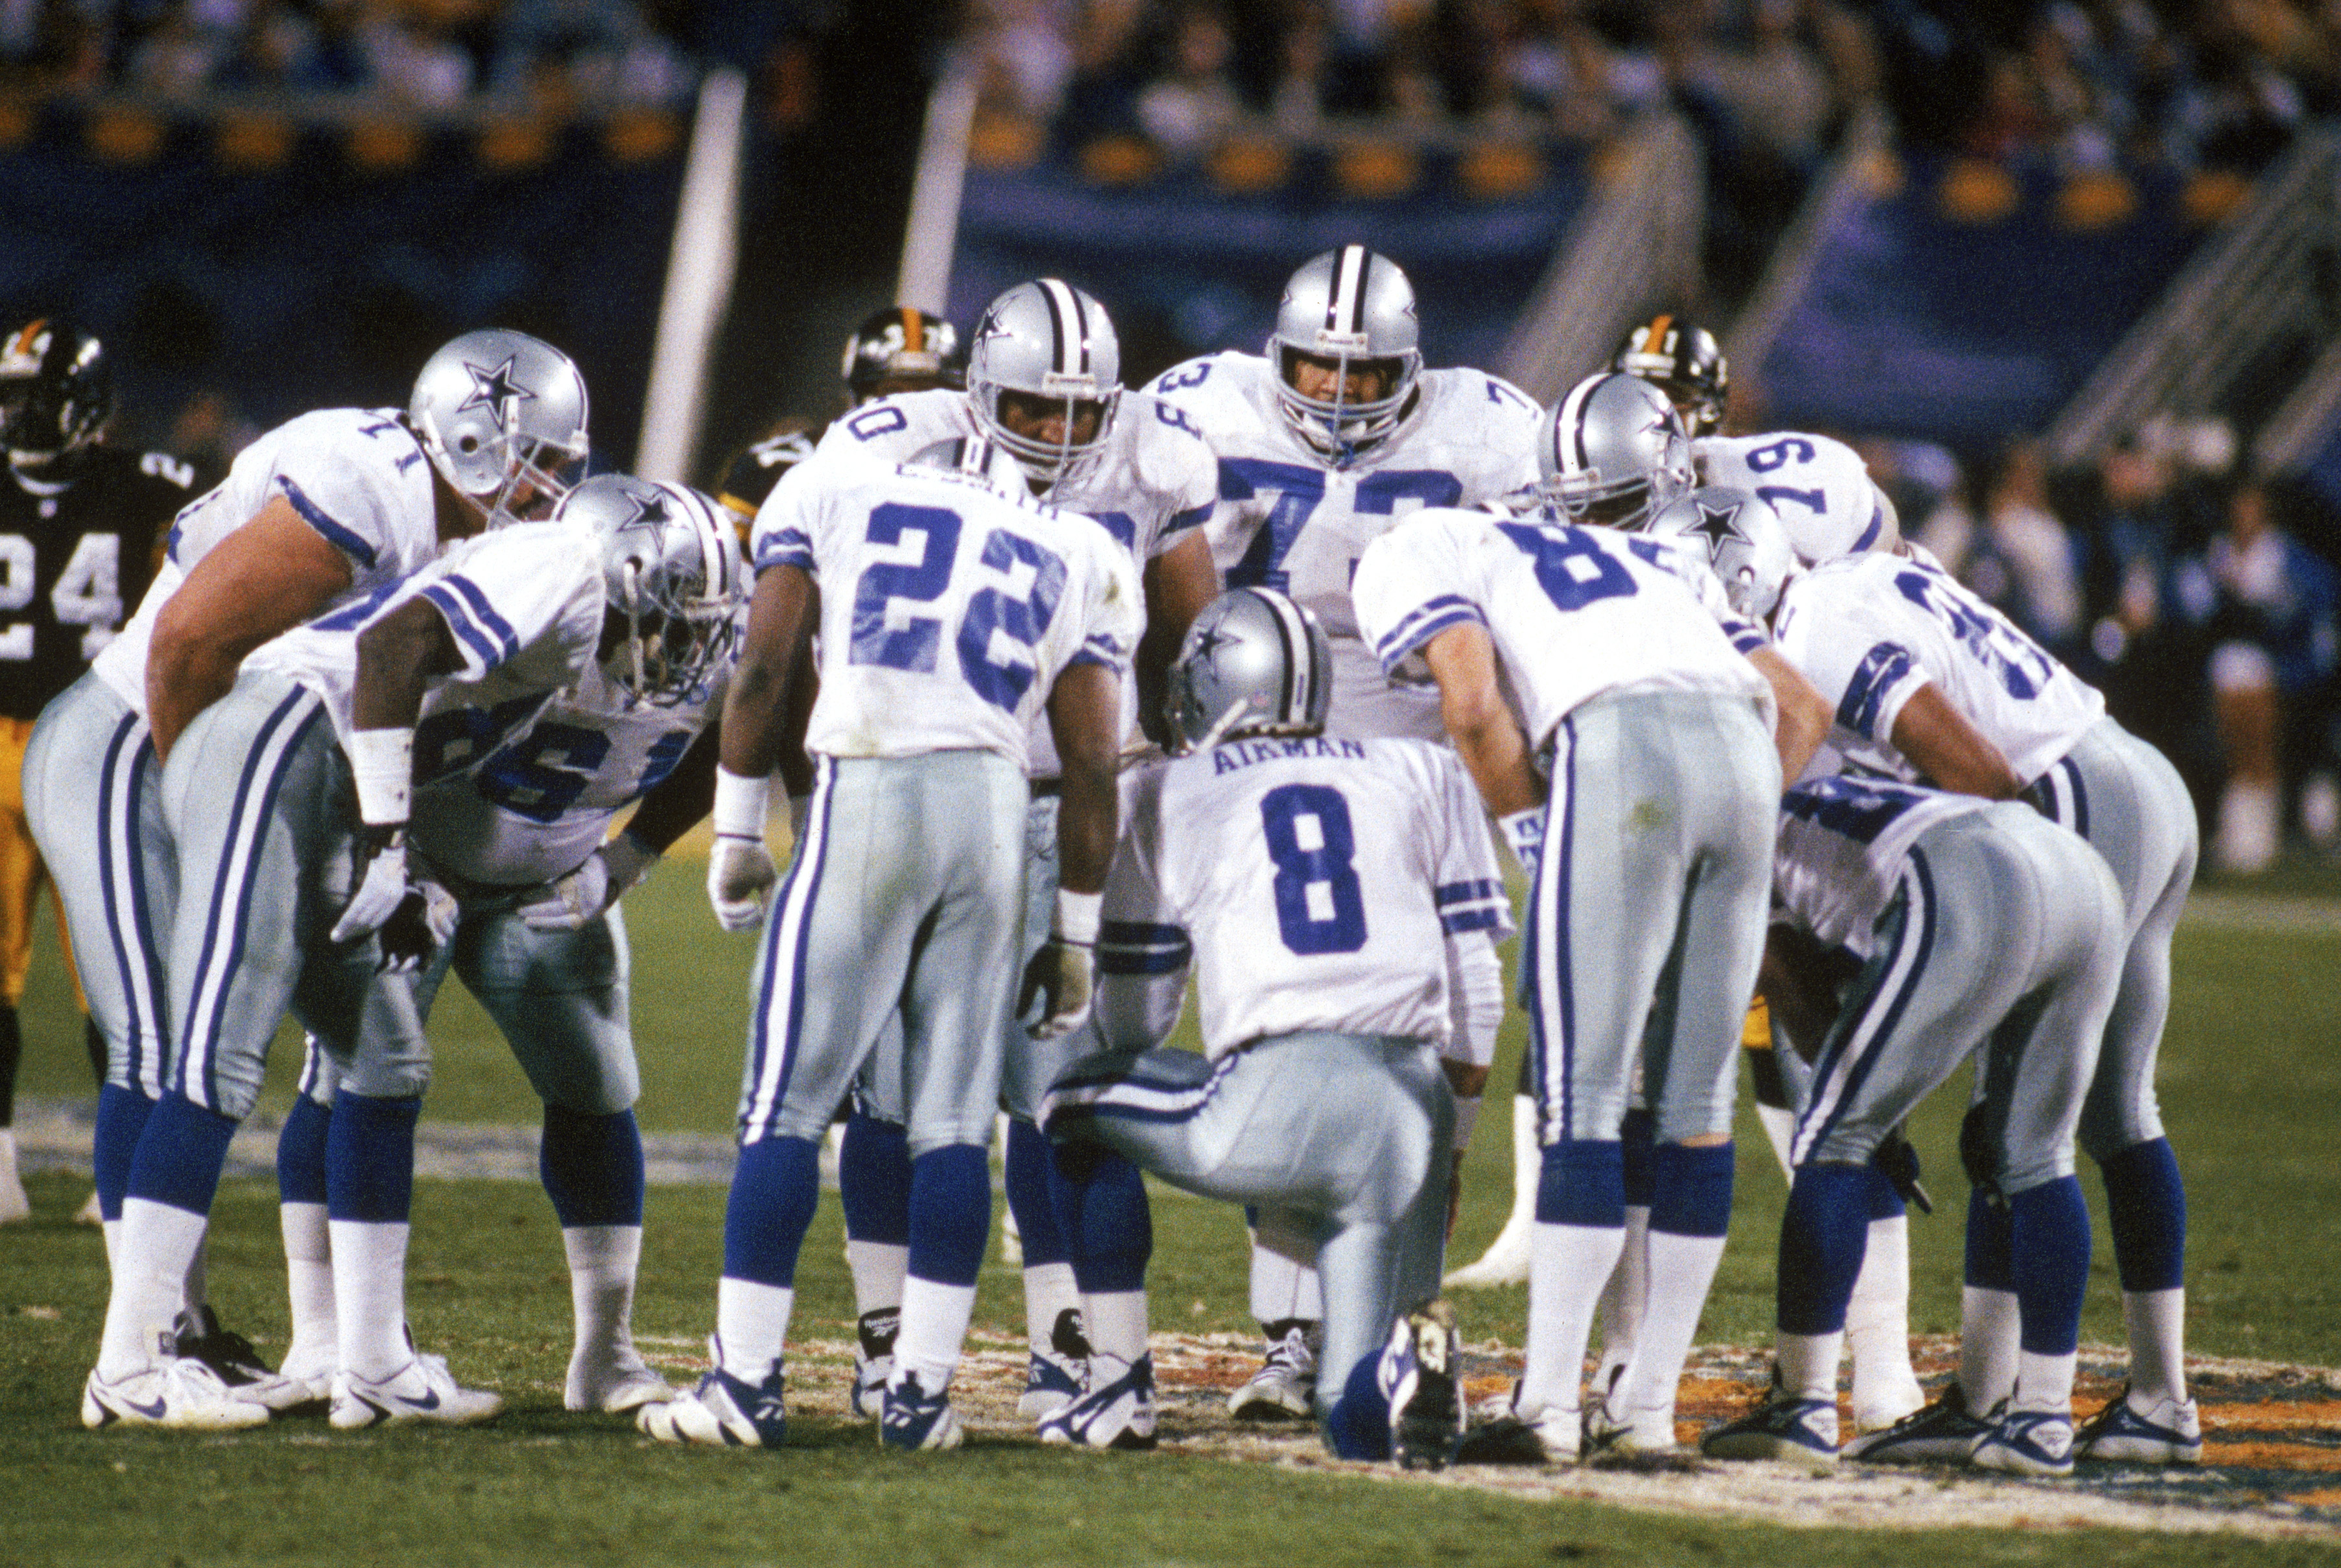 TEMPE, AZ - JANUARY 28:  Quarterback Troy Aikman #8 of the Dallas Cowboys leads his team in a huddle during Super Bowl XXX against the Pittsburgh Steelers at Sun Devil Stadium on January 28, 1996 in Tempe, Arizona.  The Cowboys won 27-17.  (Photo by Georg